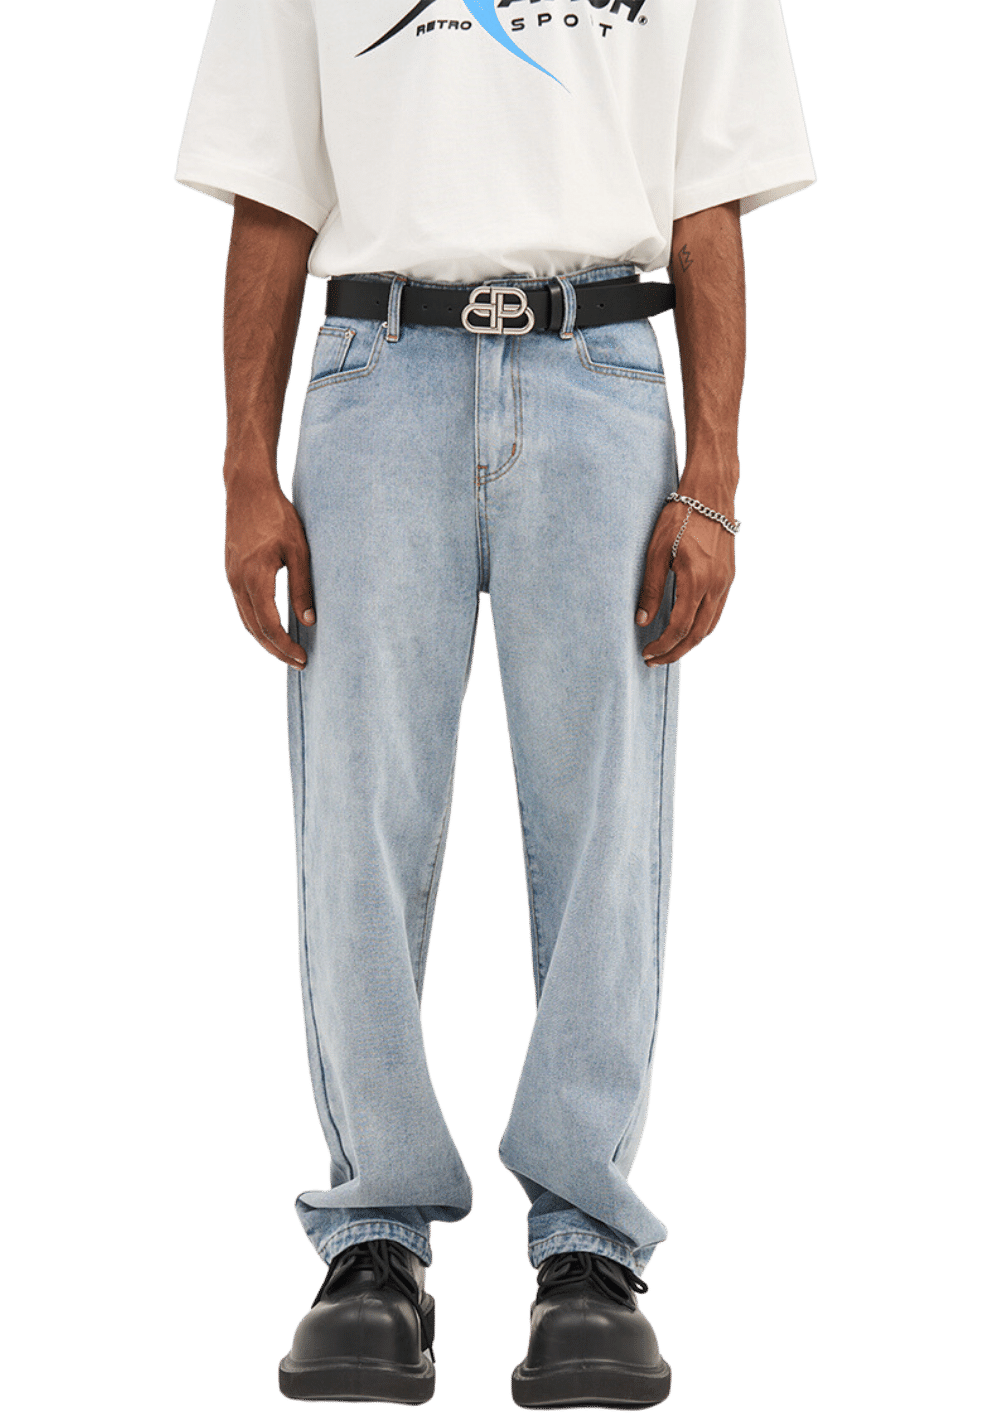 Embroidery Washed Straight Leg Jeans - PSYLOS 1, Embroidery Washed Straight Leg Jeans, Pants, HARSH AND CRUEL, PSYLOS 1